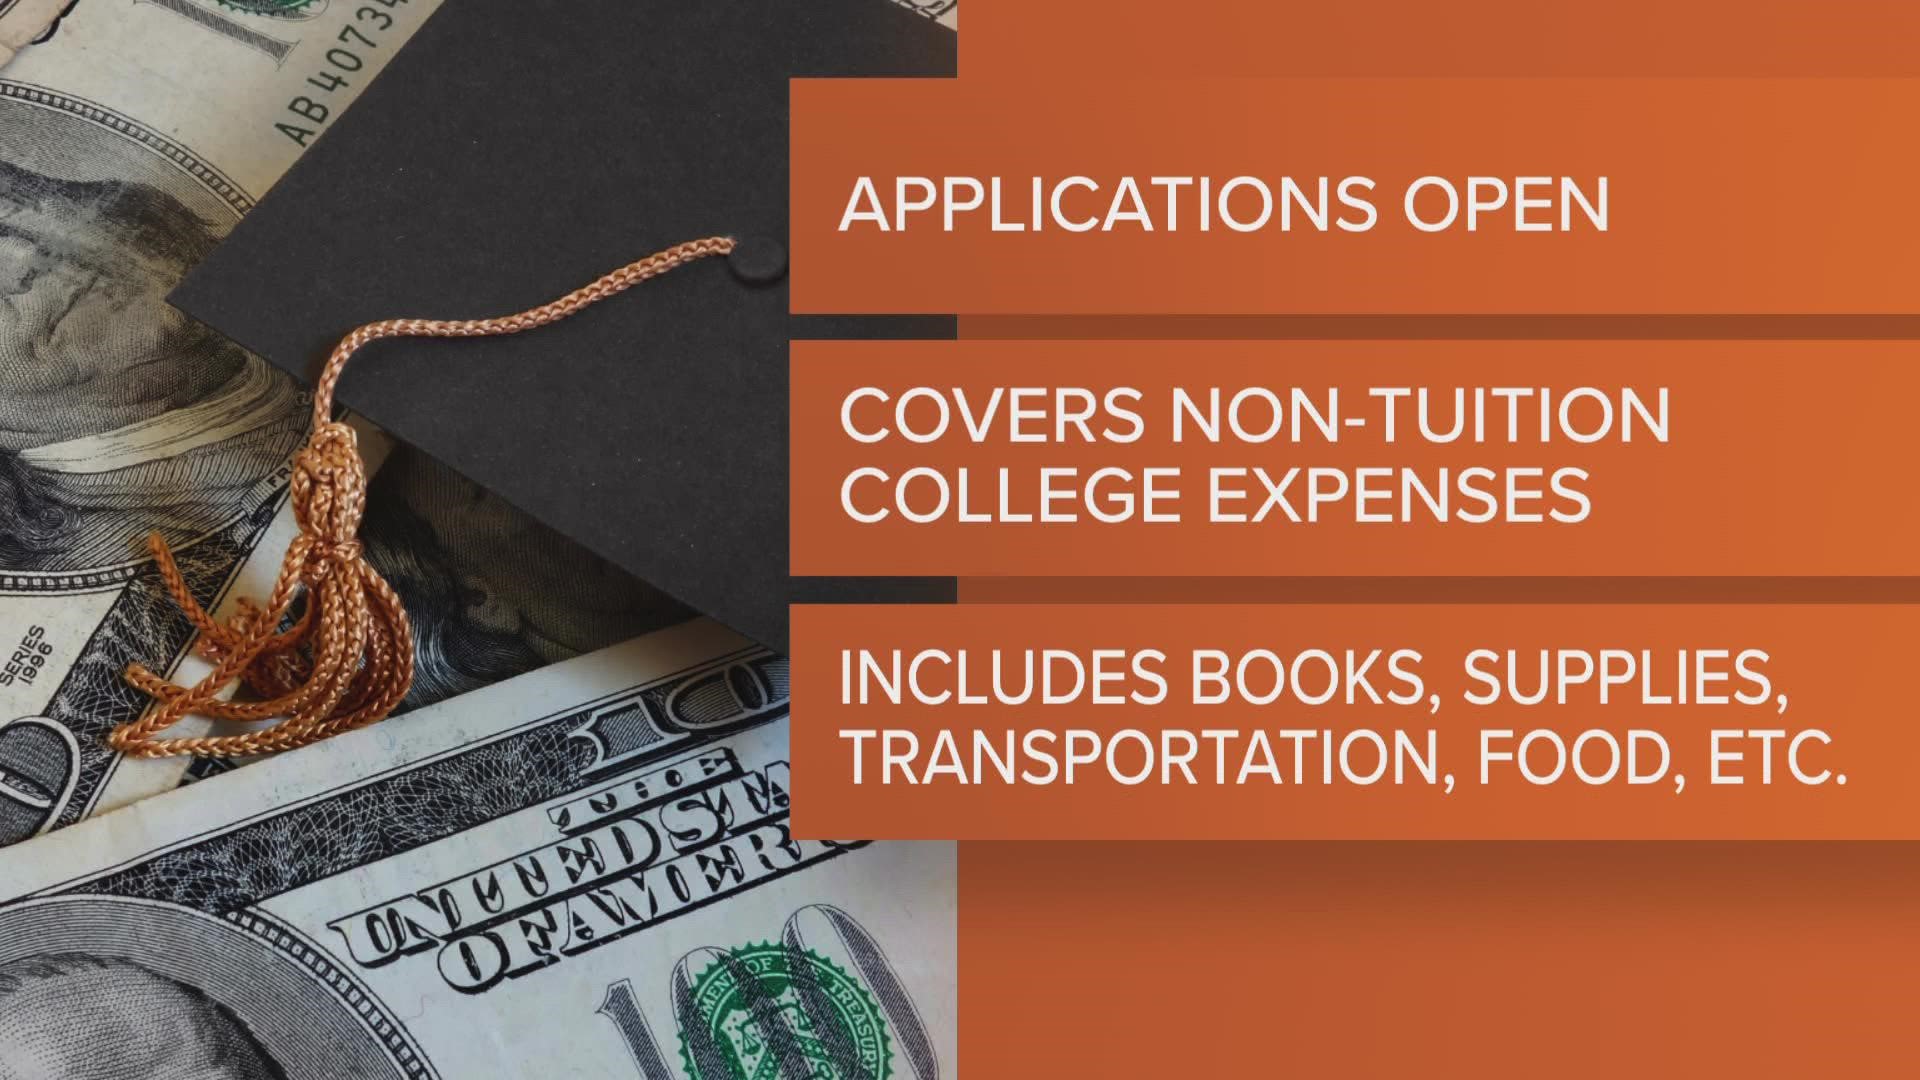 Students who meet eligibility requirements can apply for COMPLETE grants through tnAchieves, which pay up to $1000 per semester towards necessities.